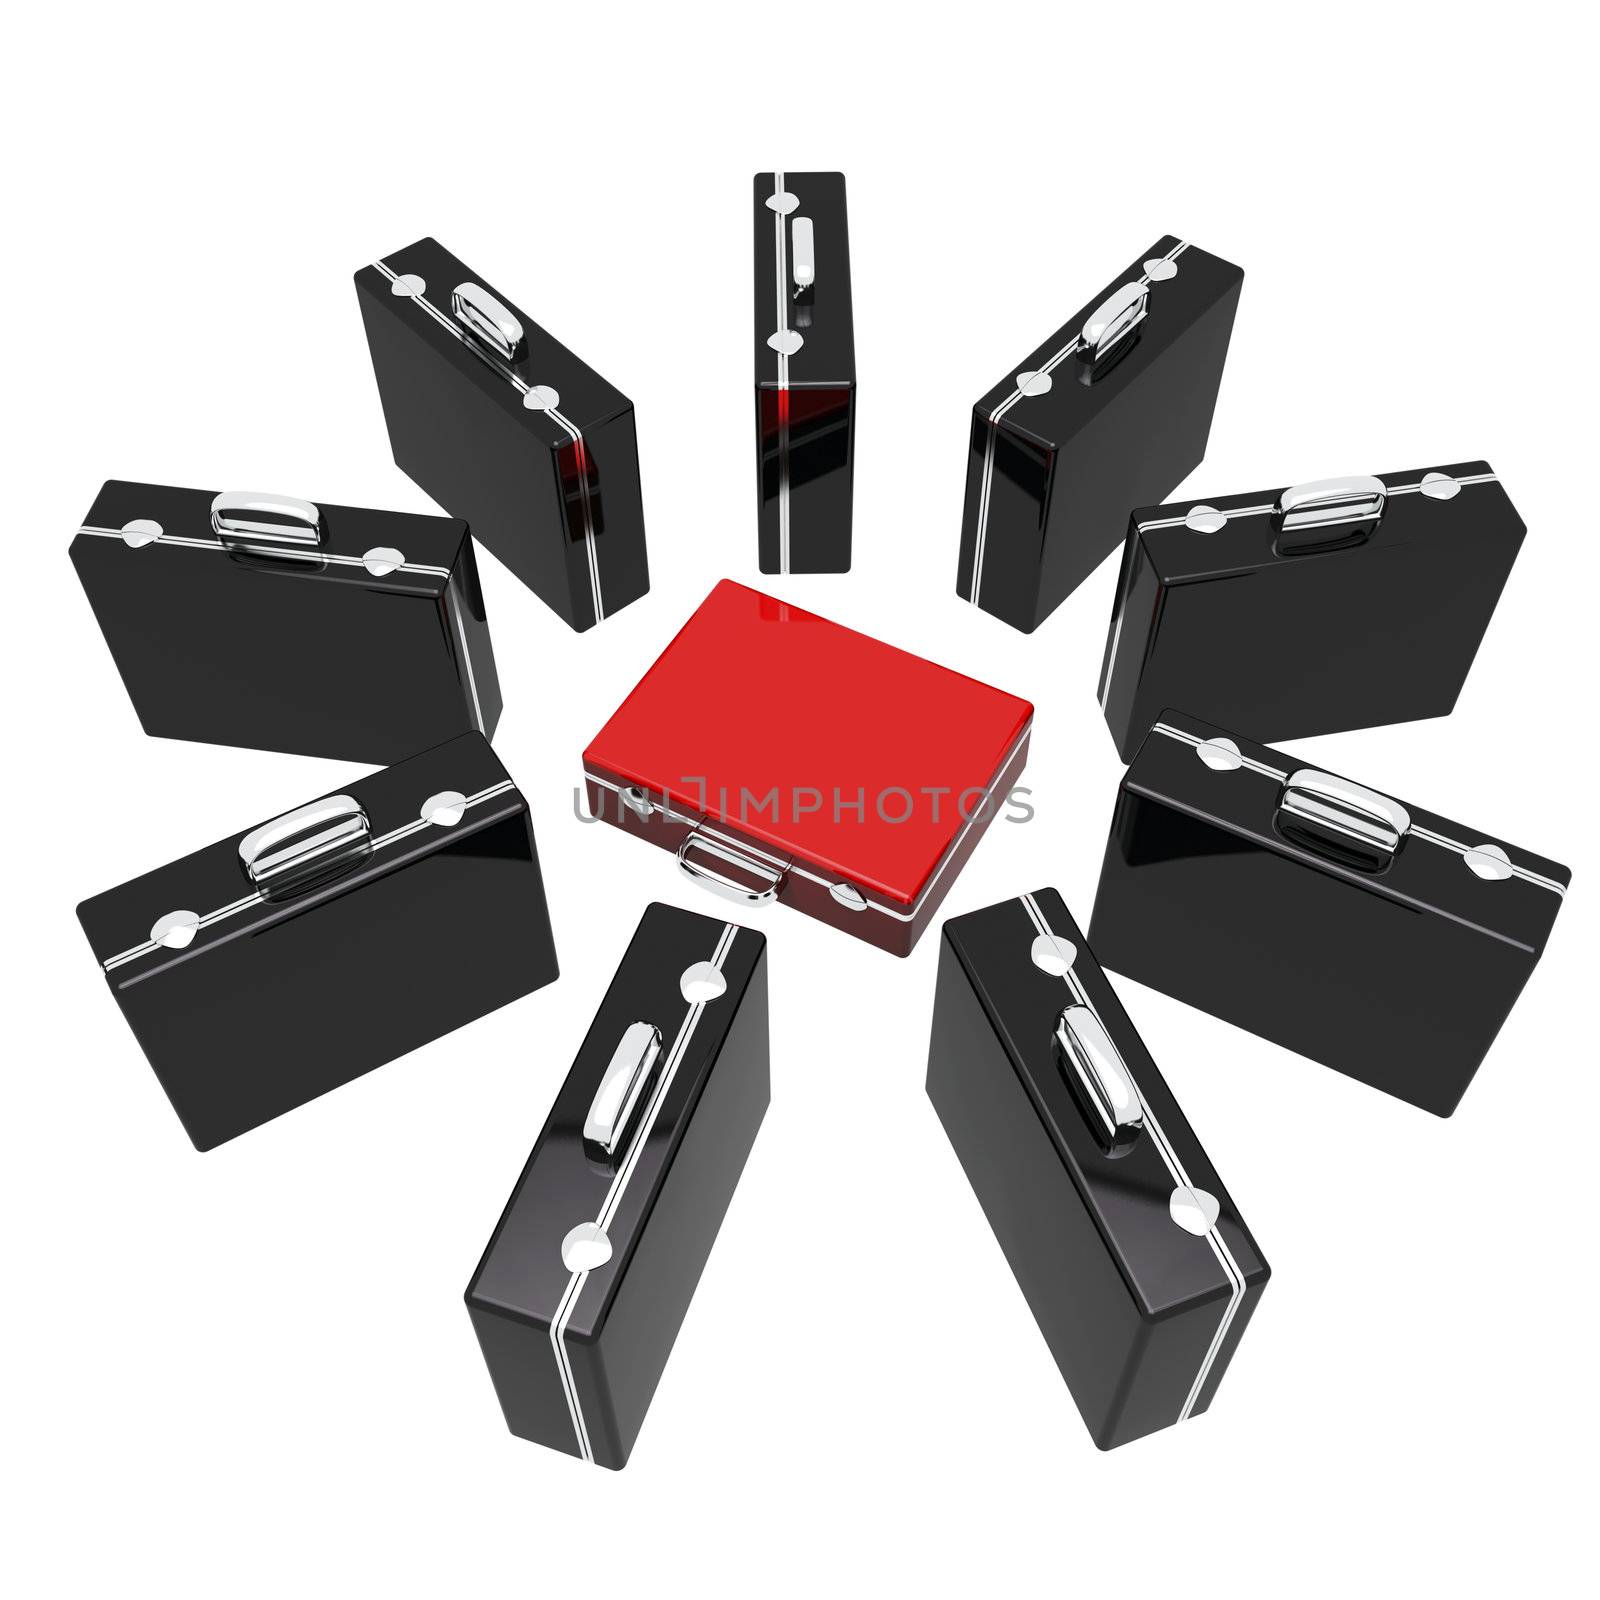 Unique concept of red briefcase stand out from a group of black briefcases